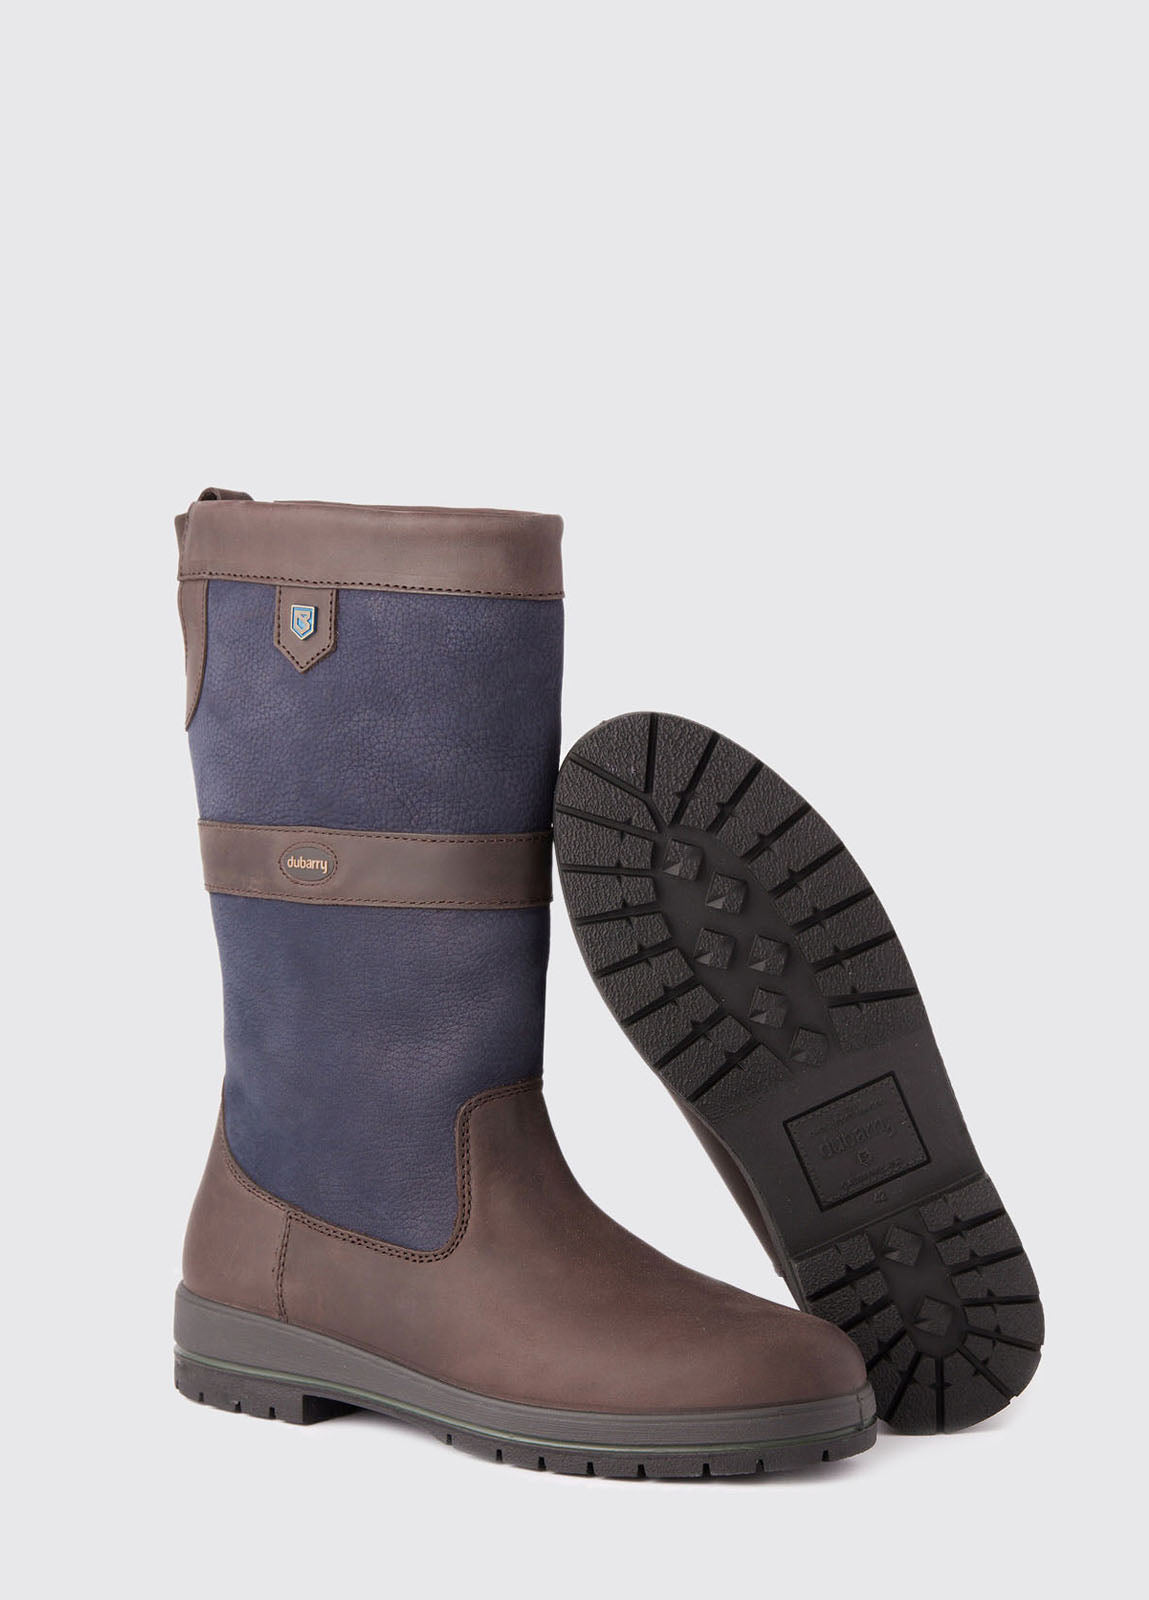 Kildare Country Boot - Navy/Brown